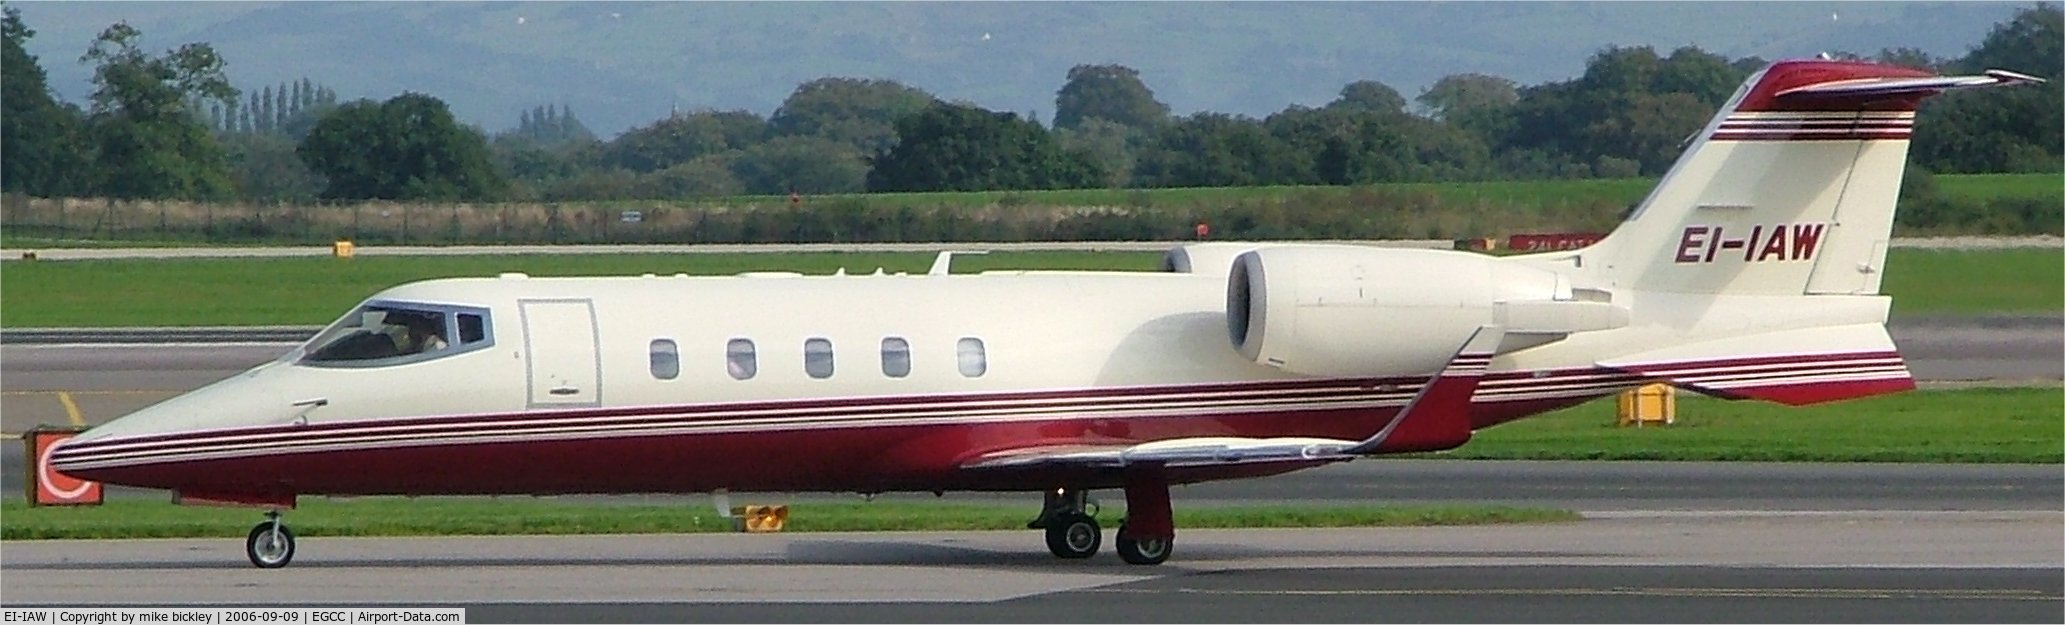 EI-IAW, 2001 Learjet 60 C/N 60-218, irish visitor at manchester